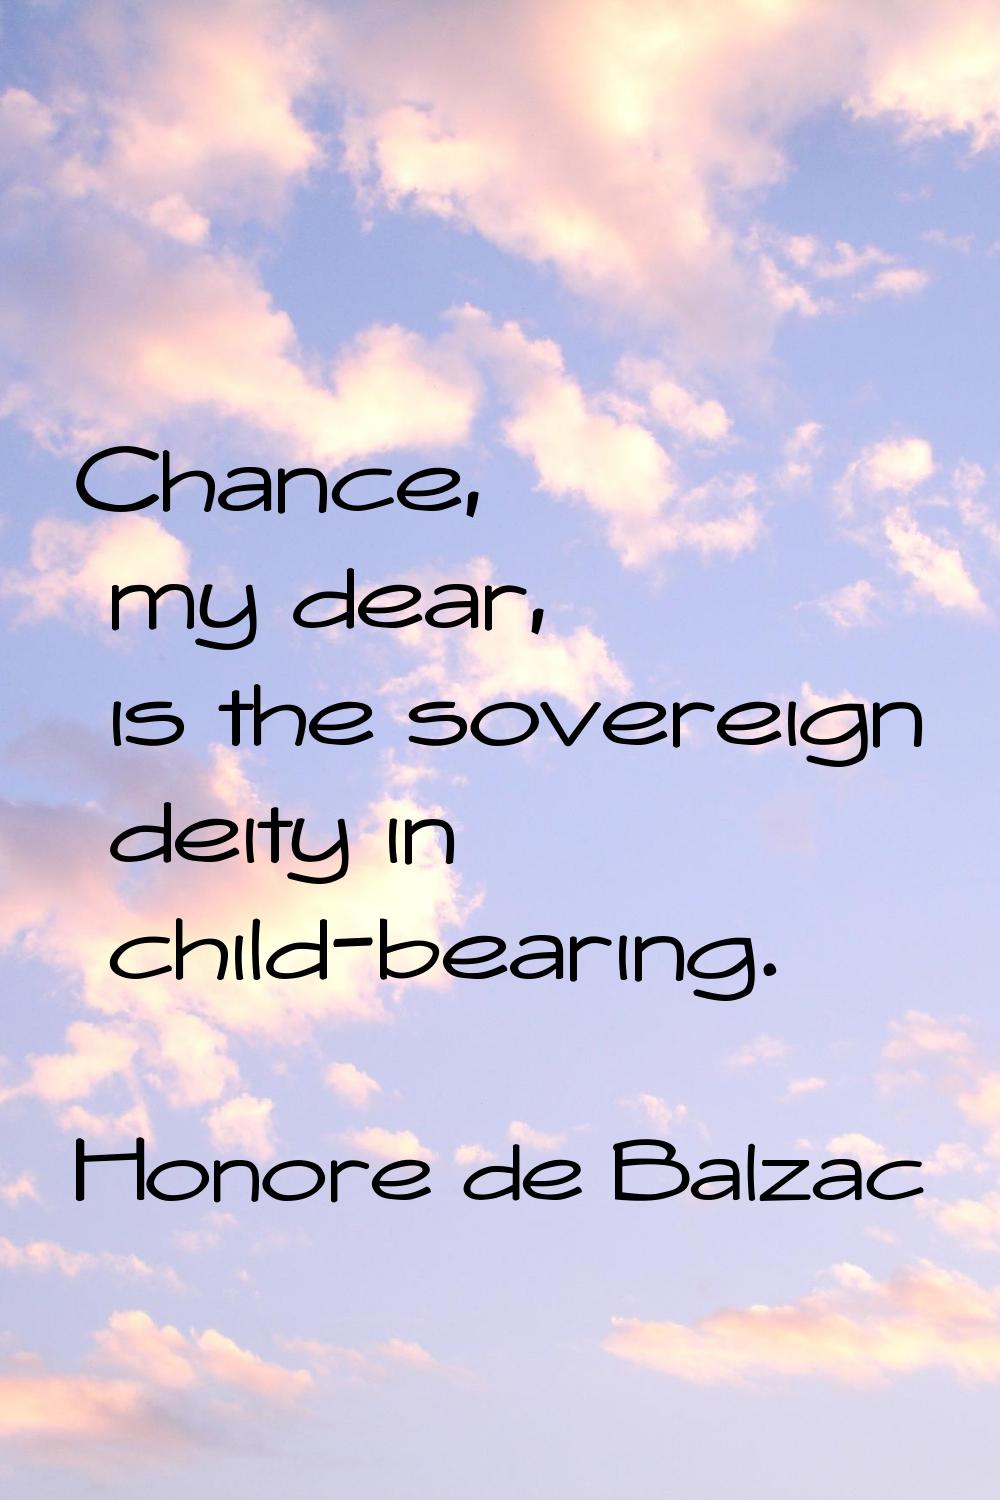 Chance, my dear, is the sovereign deity in child-bearing.